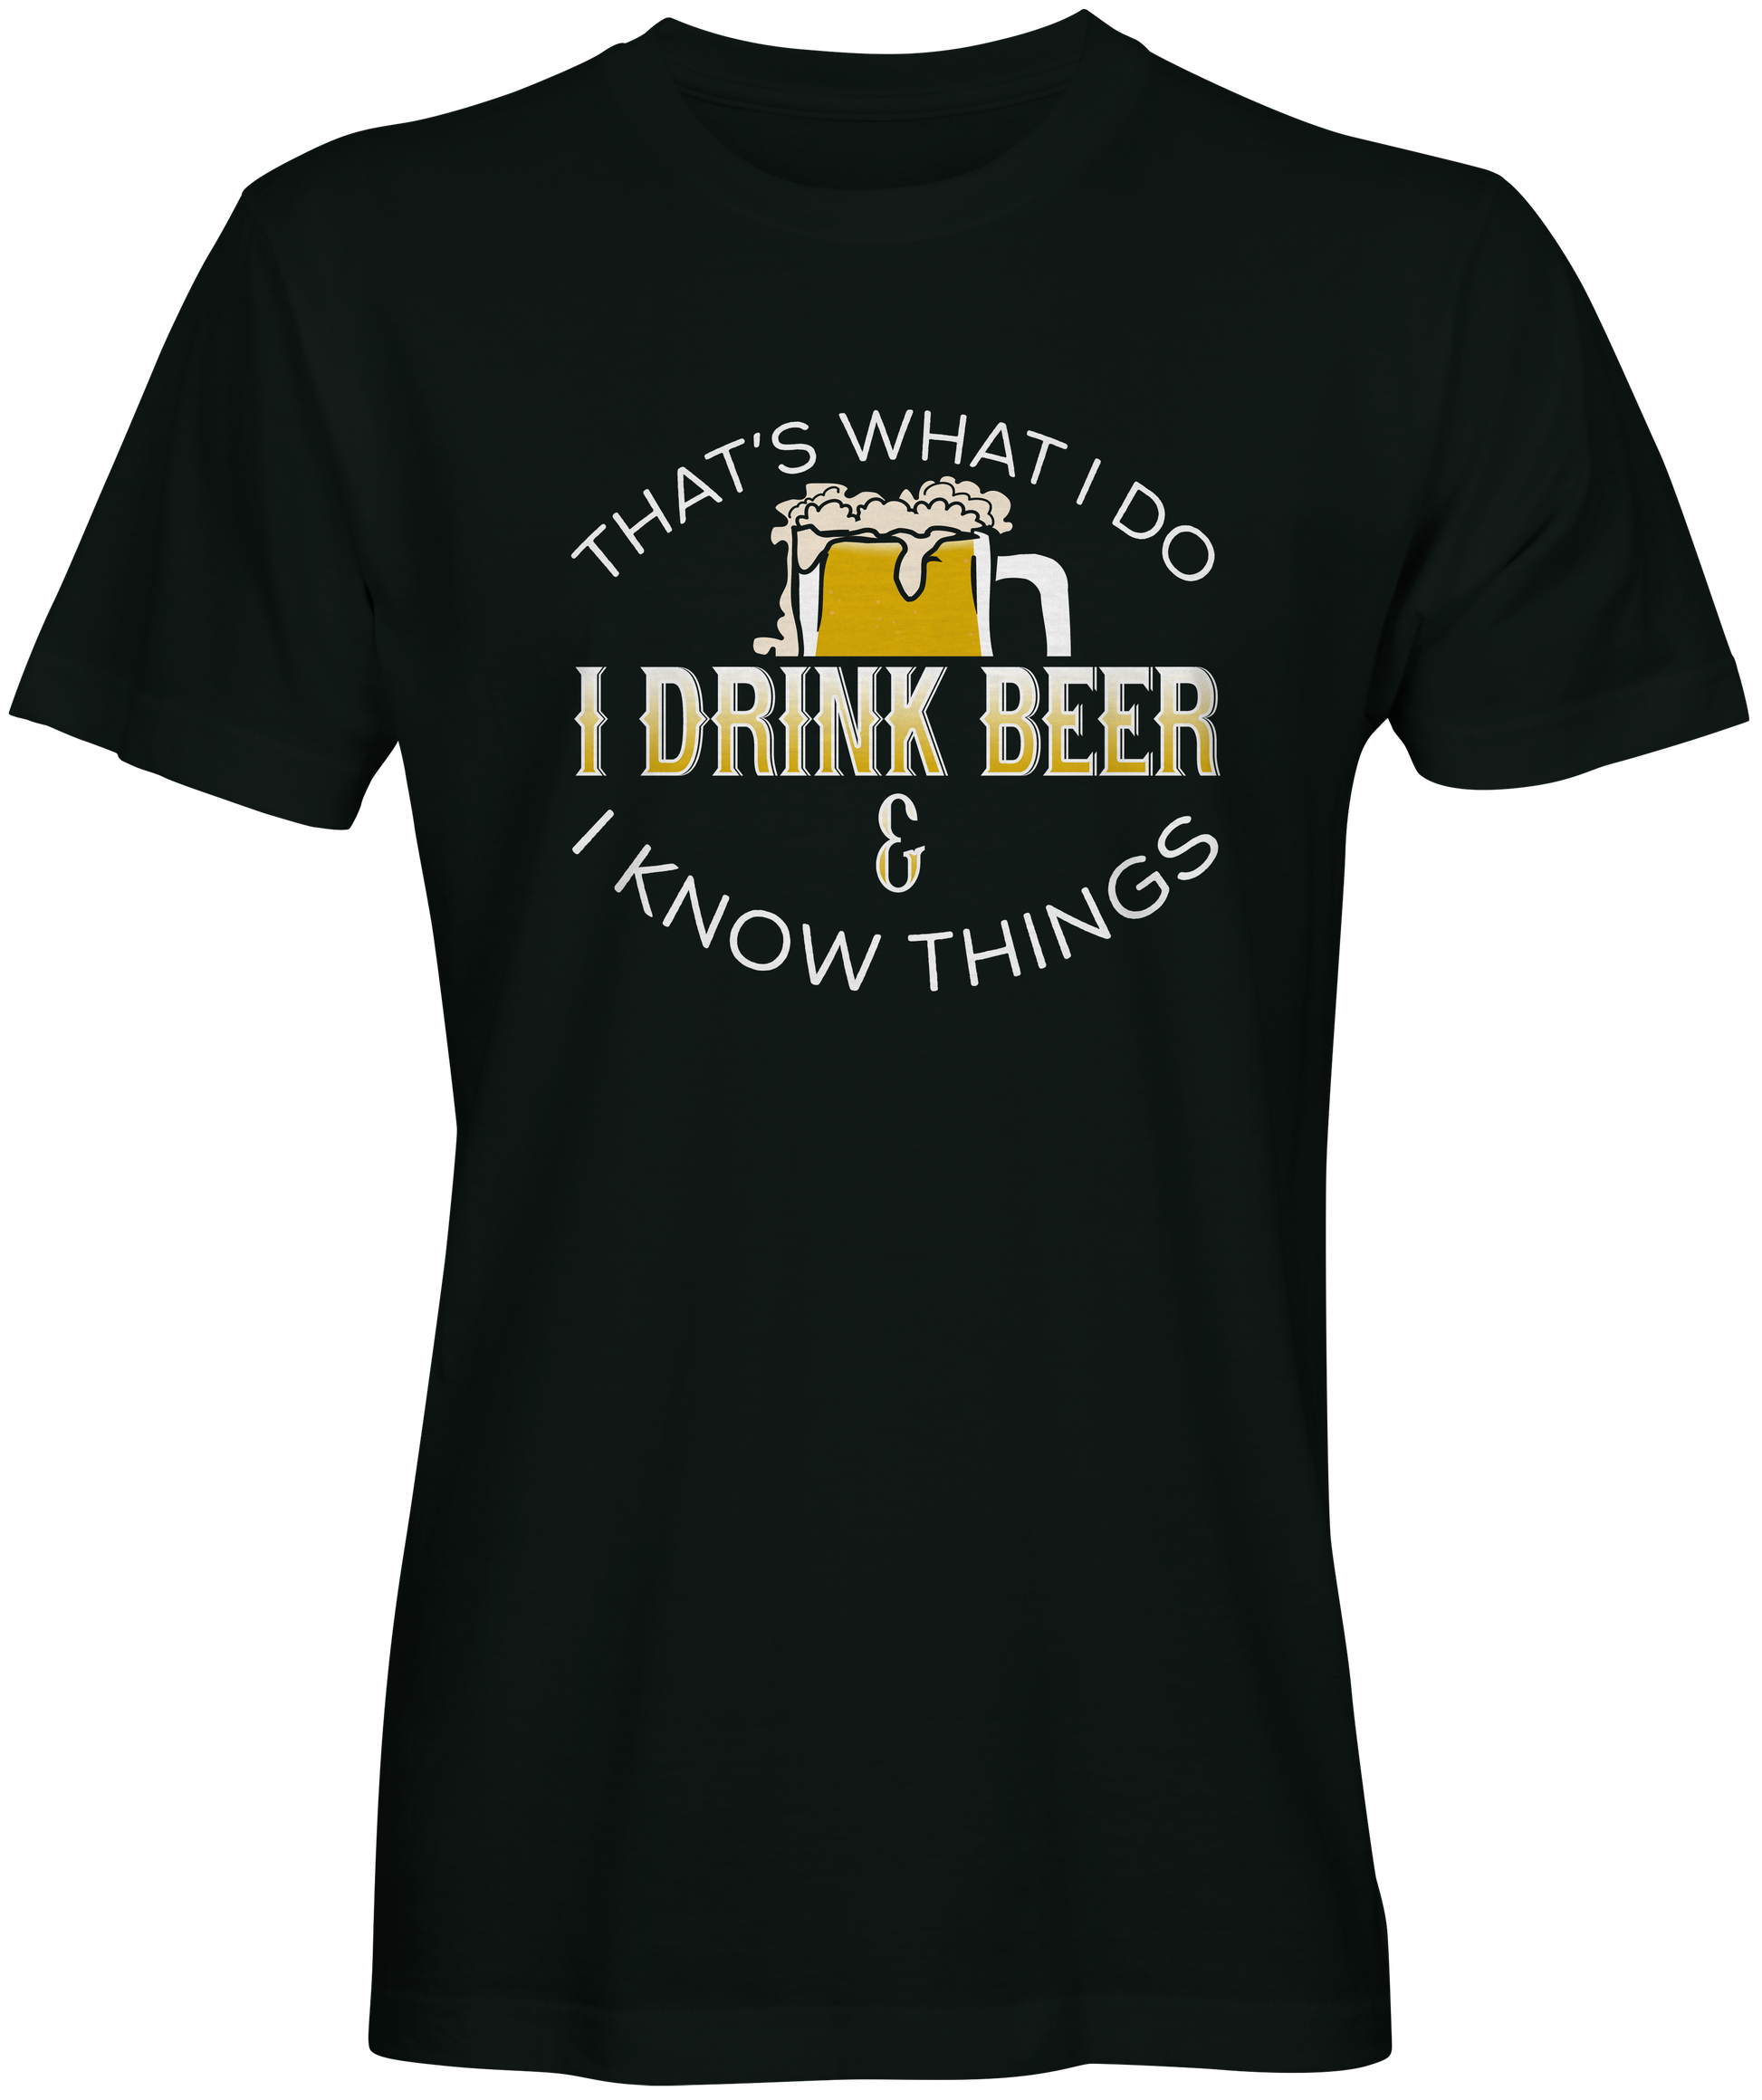 Thats What I Do Beer Slogan Tee